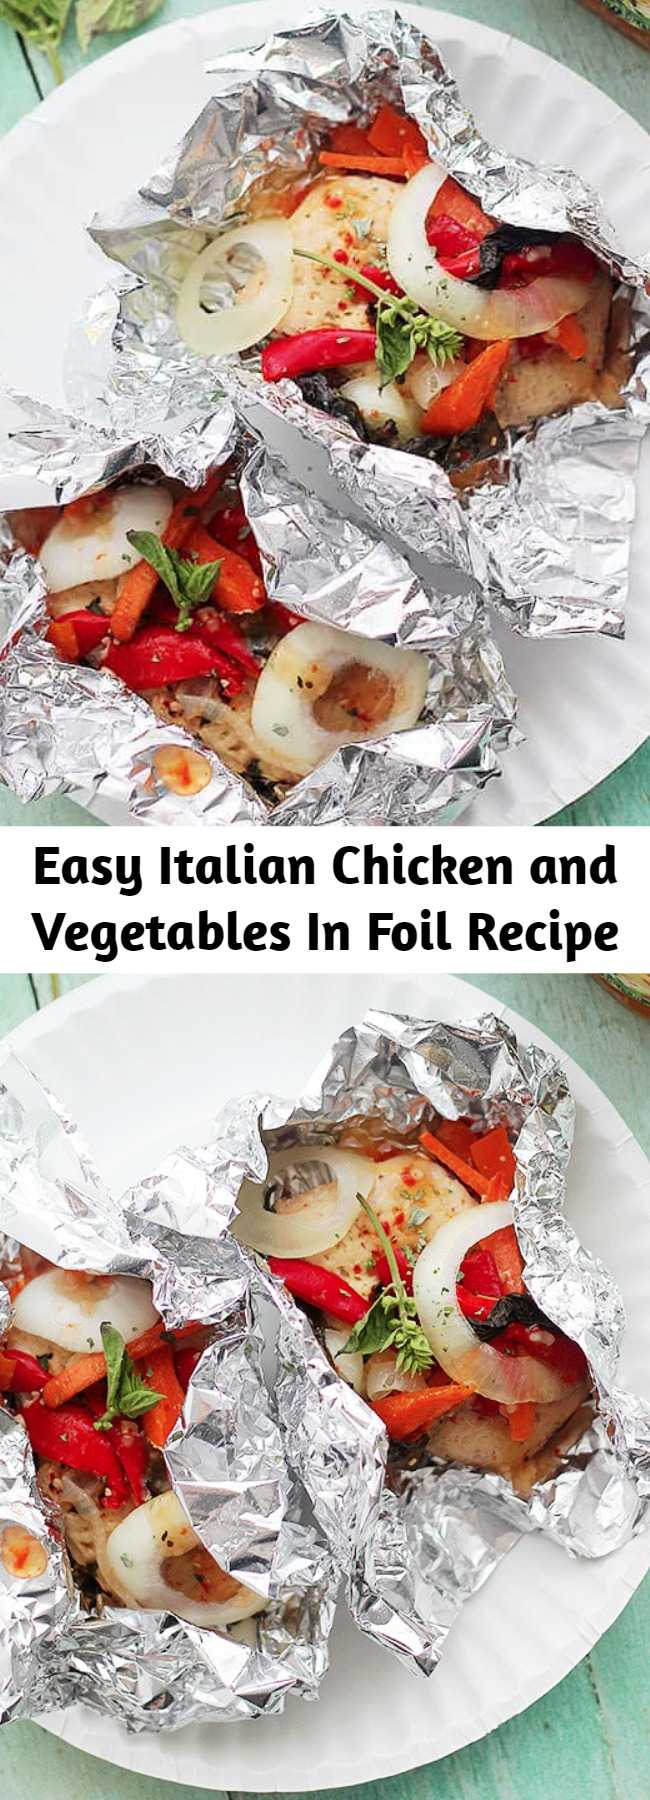 Easy Italian Chicken and Vegetables In Foil Recipe - Italian Chicken and Vegetables In Foil is such an easy & delicious chicken recipe! Flavorful, incredibly moist chicken breasts baked in aluminum foil with peppers, onion, garlic, fresh herbs and Italian Dressing. #chickenbreasts #foildinner